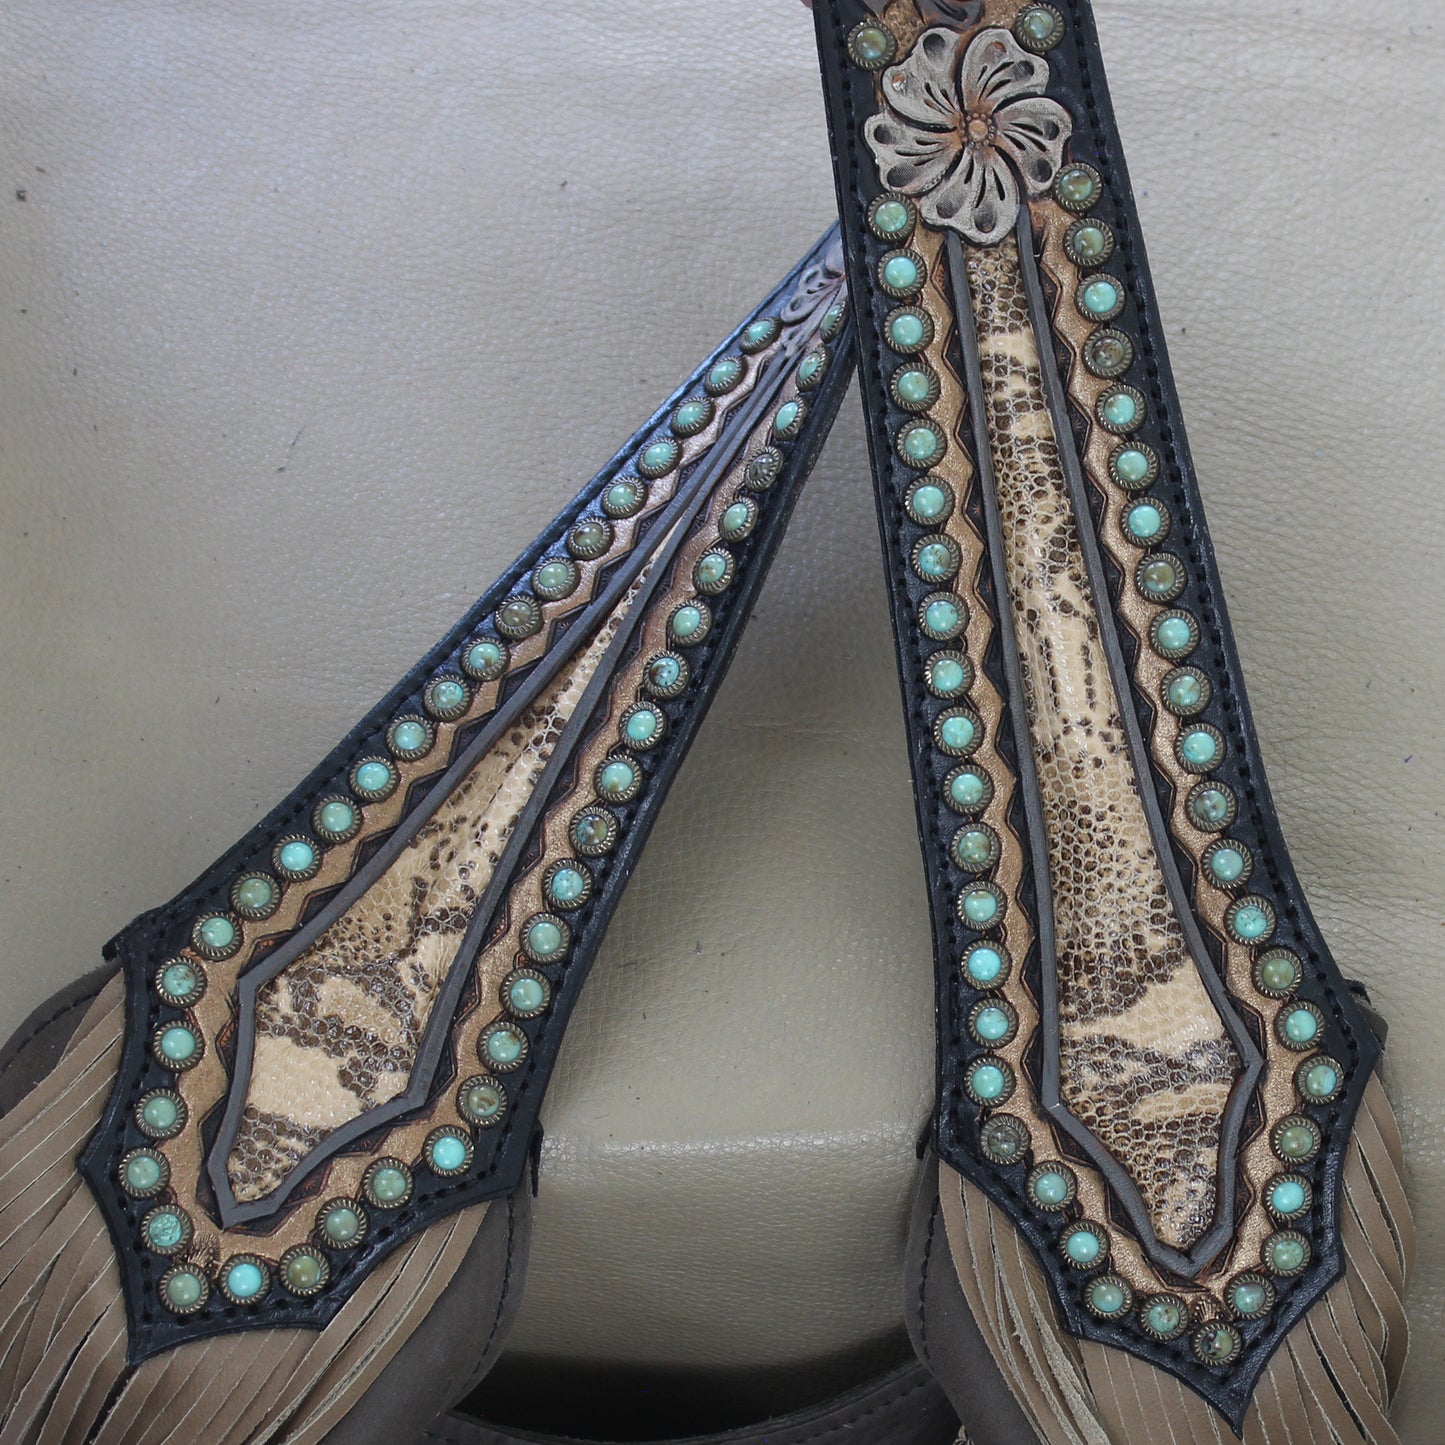 
                  
                    Close-up of ornate Heritage Brand glasses cases with turquoise inlays and stitched detailing.
                  
                